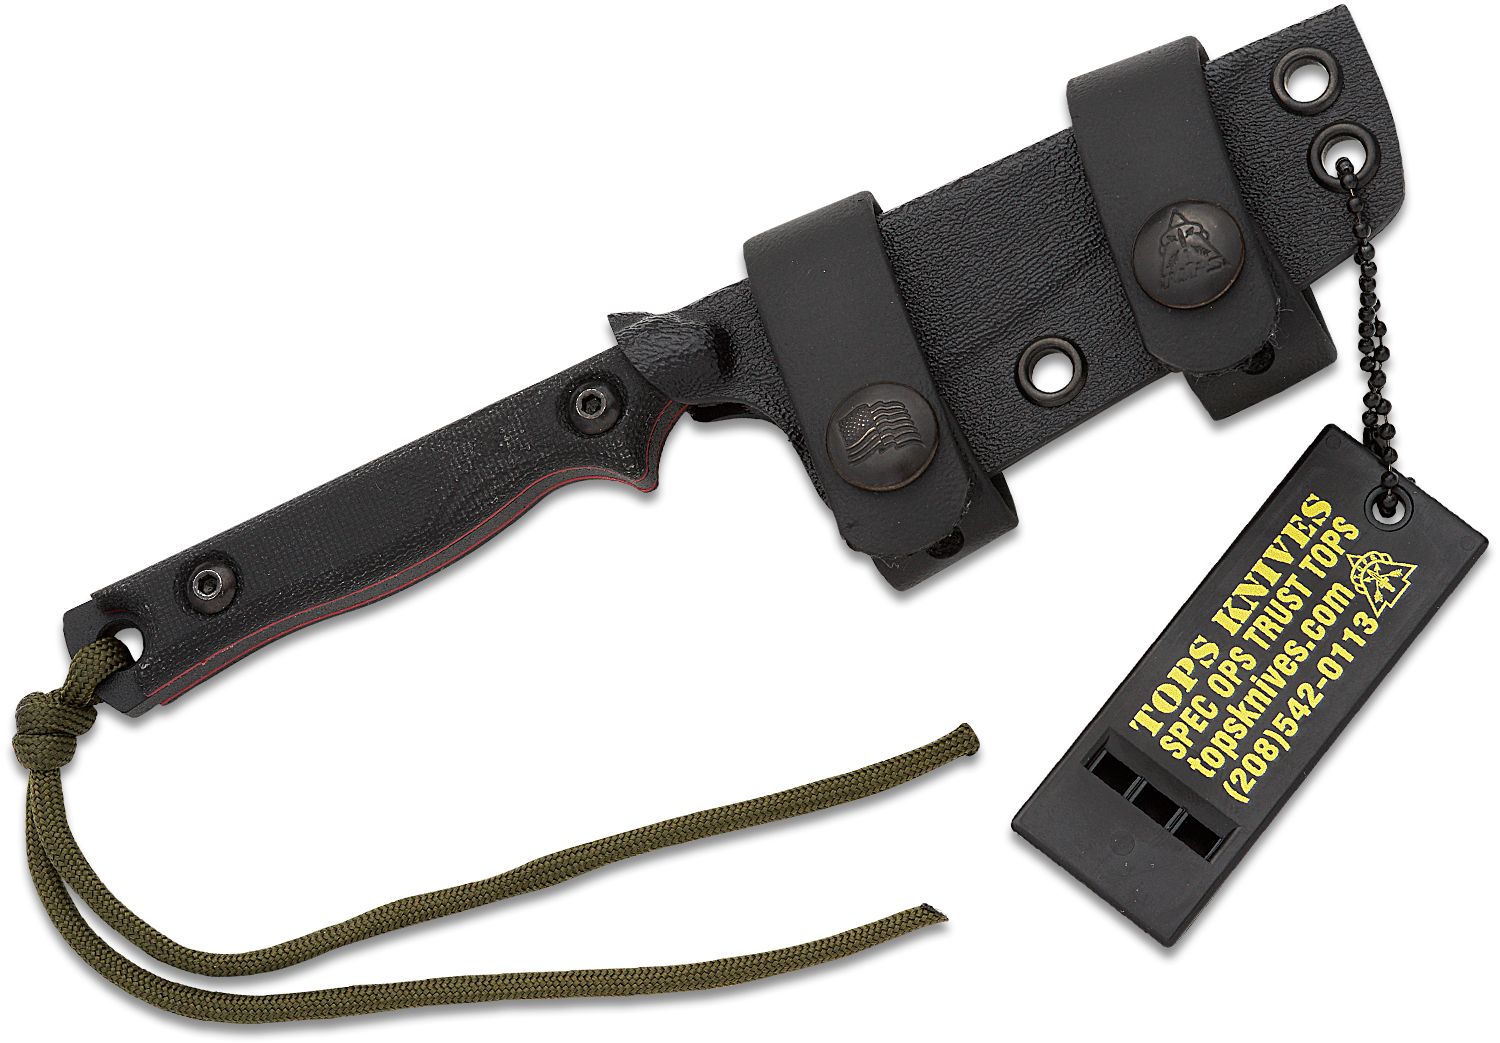 Street Scalpel 2.0 Knife - TOPS Knives Tactical OPS USA